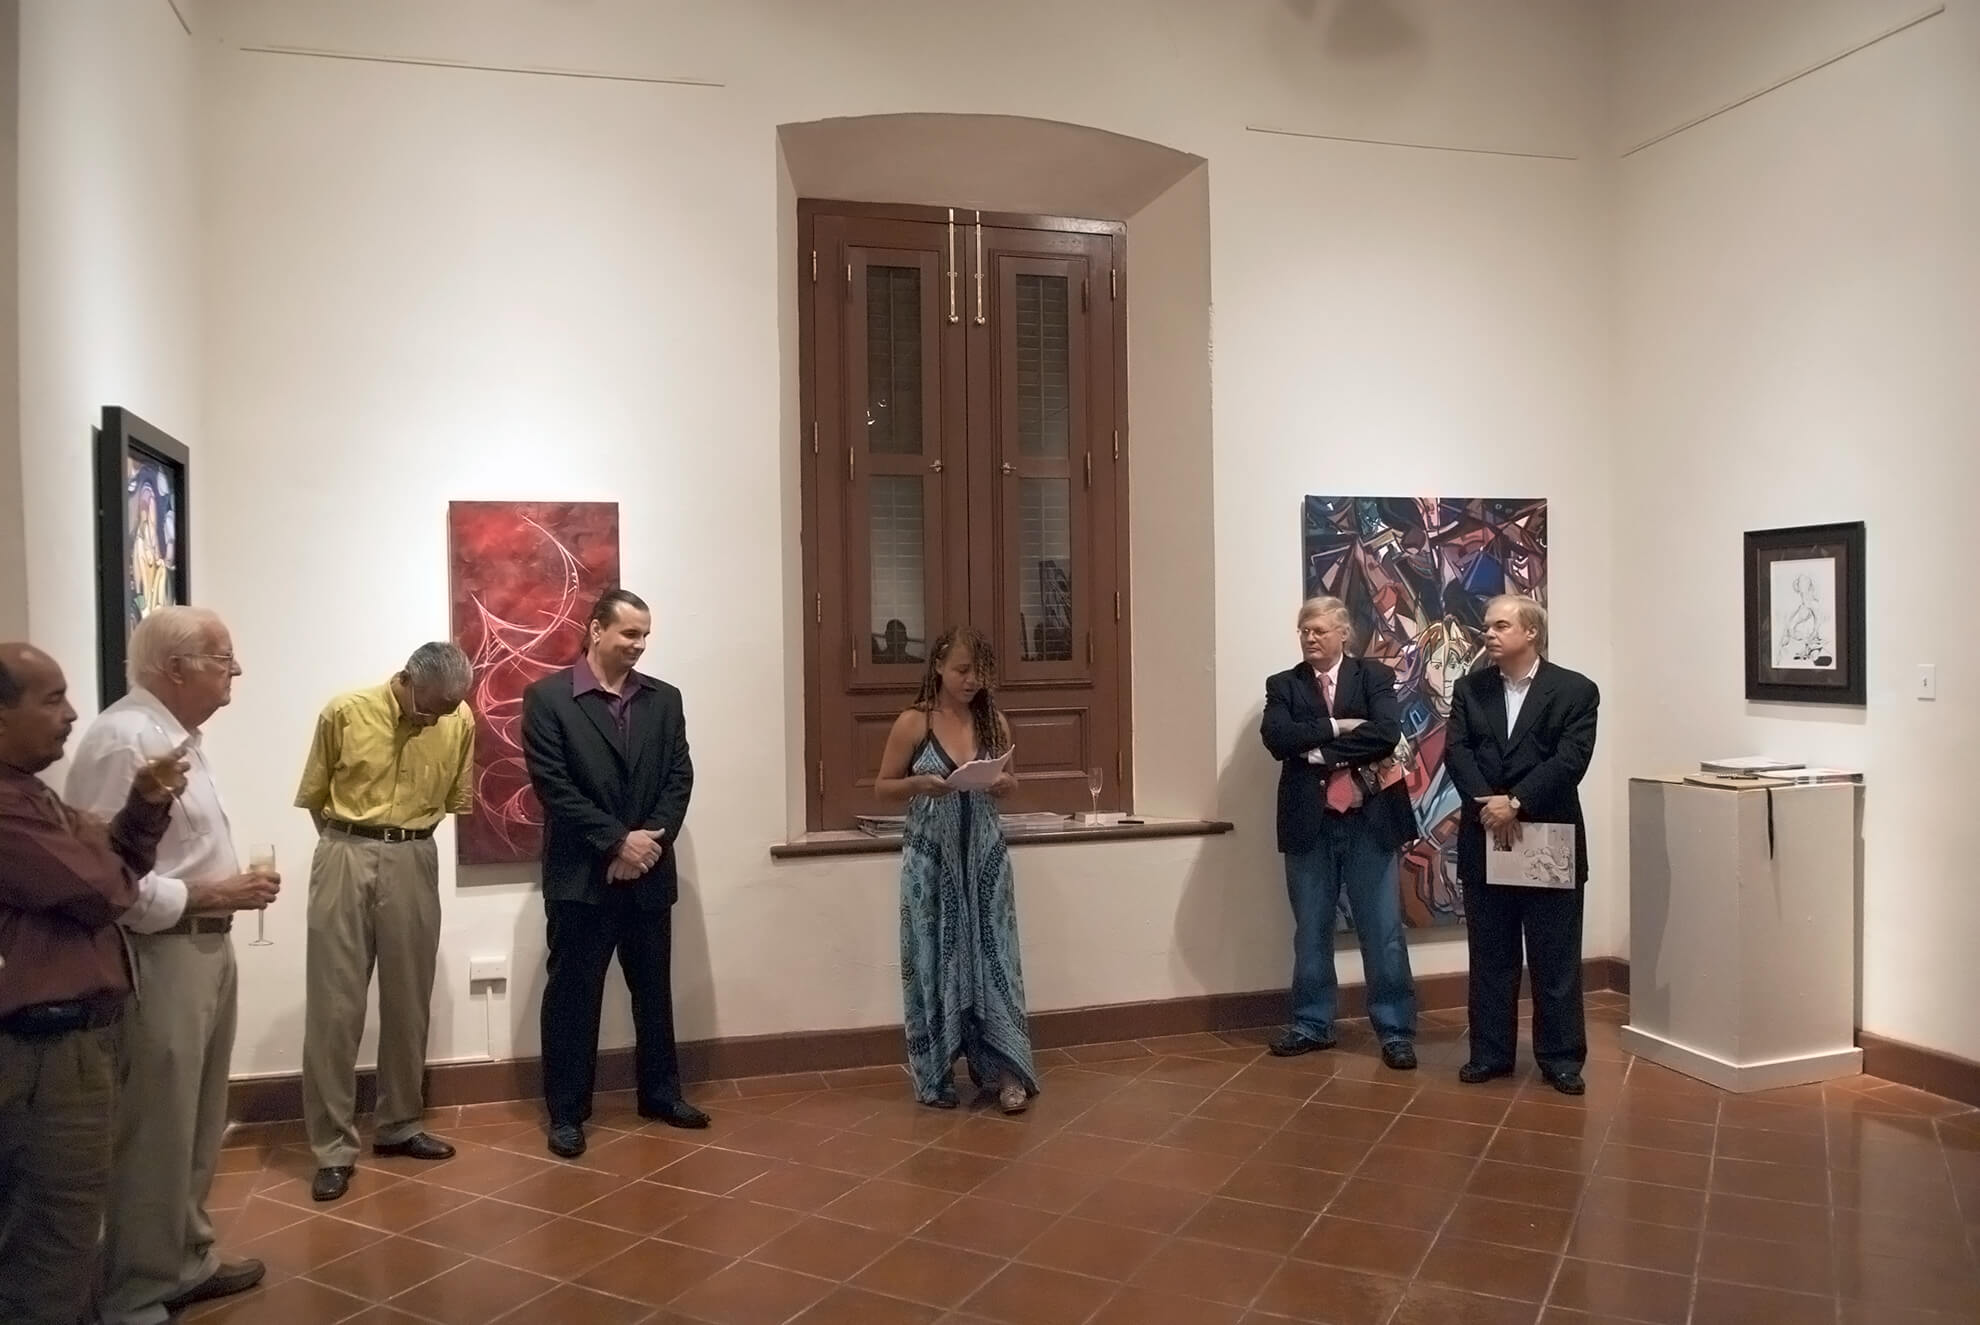 Poet Lady Lee Andrews reciting her A Poem to an Artist, at the opening reception of Korber's Retrospect Exhibit A decade of line and color in Museo de las Américas - San Juan, Puerto Rico.